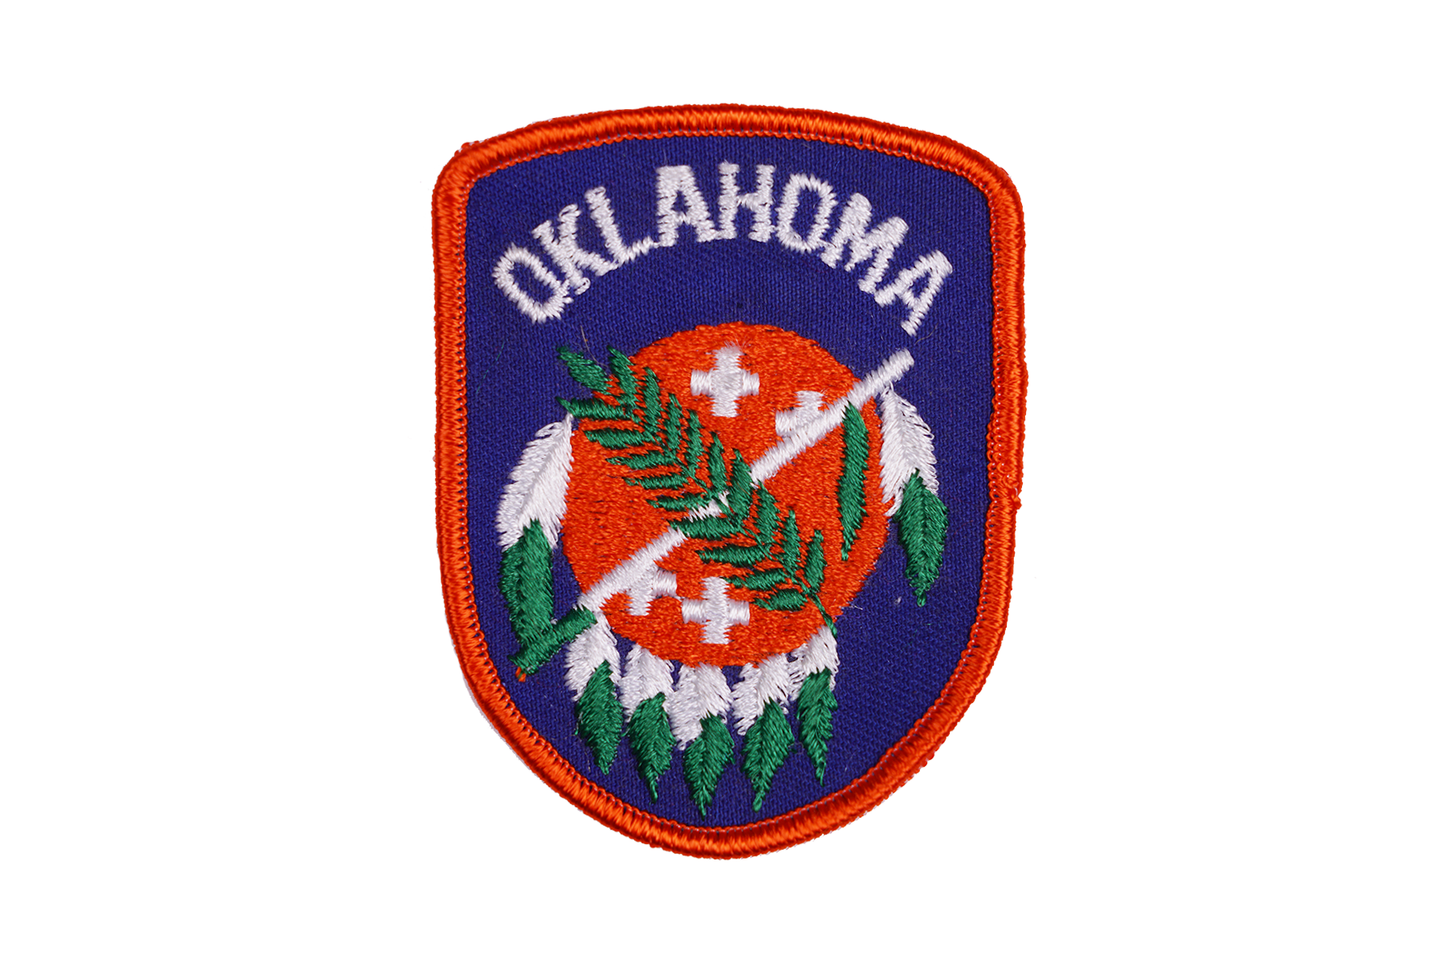 Vintage Oklahoma Embroidered Patch